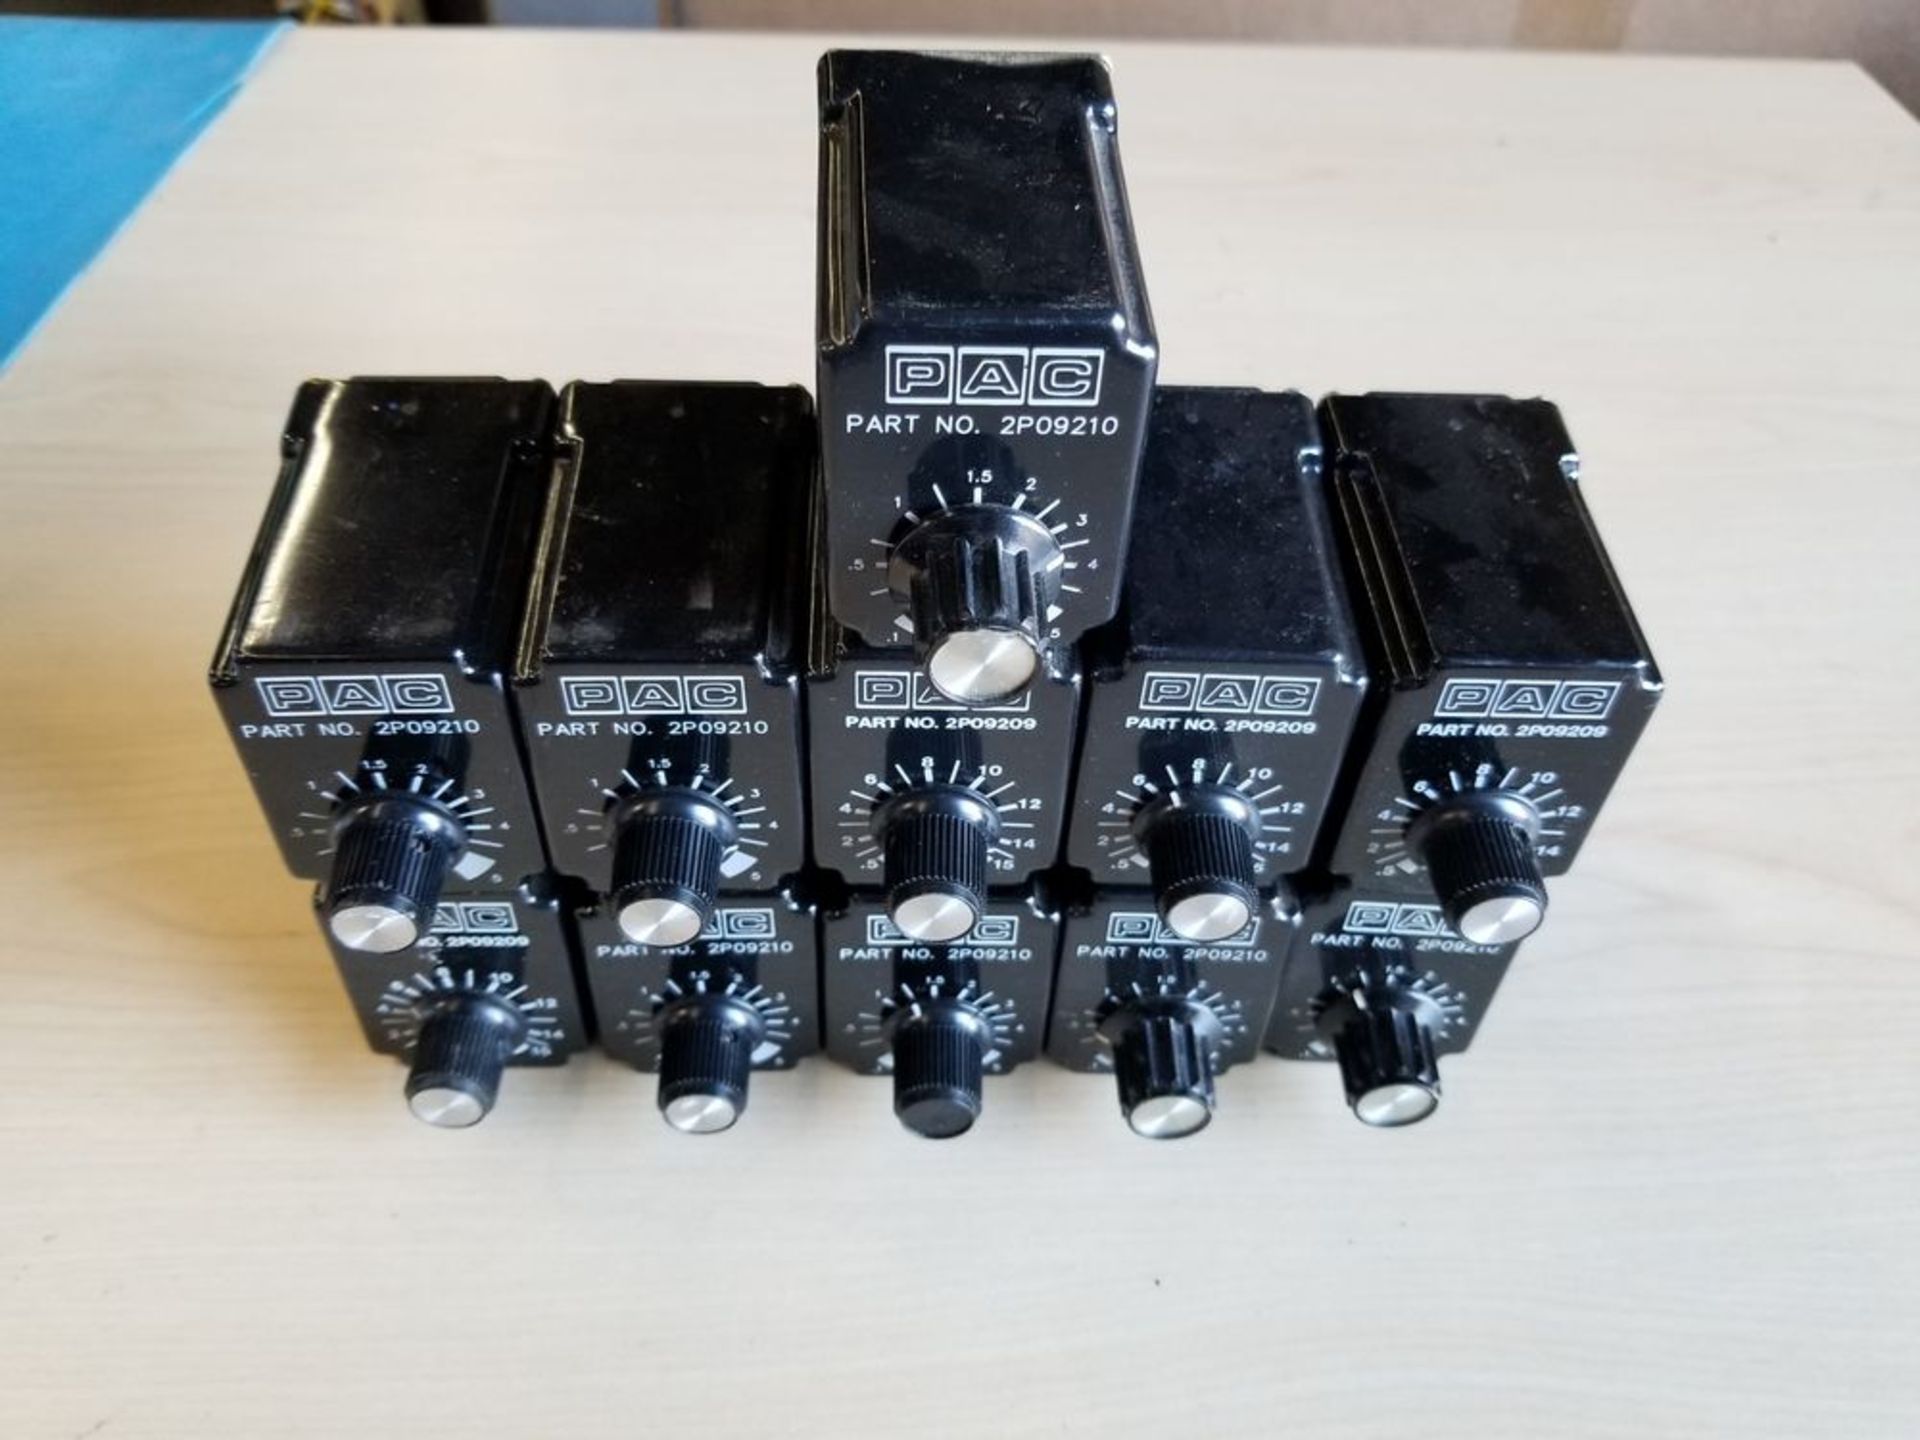 LOT OF 11 PAC AUTOMATION TIMER RELAY MODULES